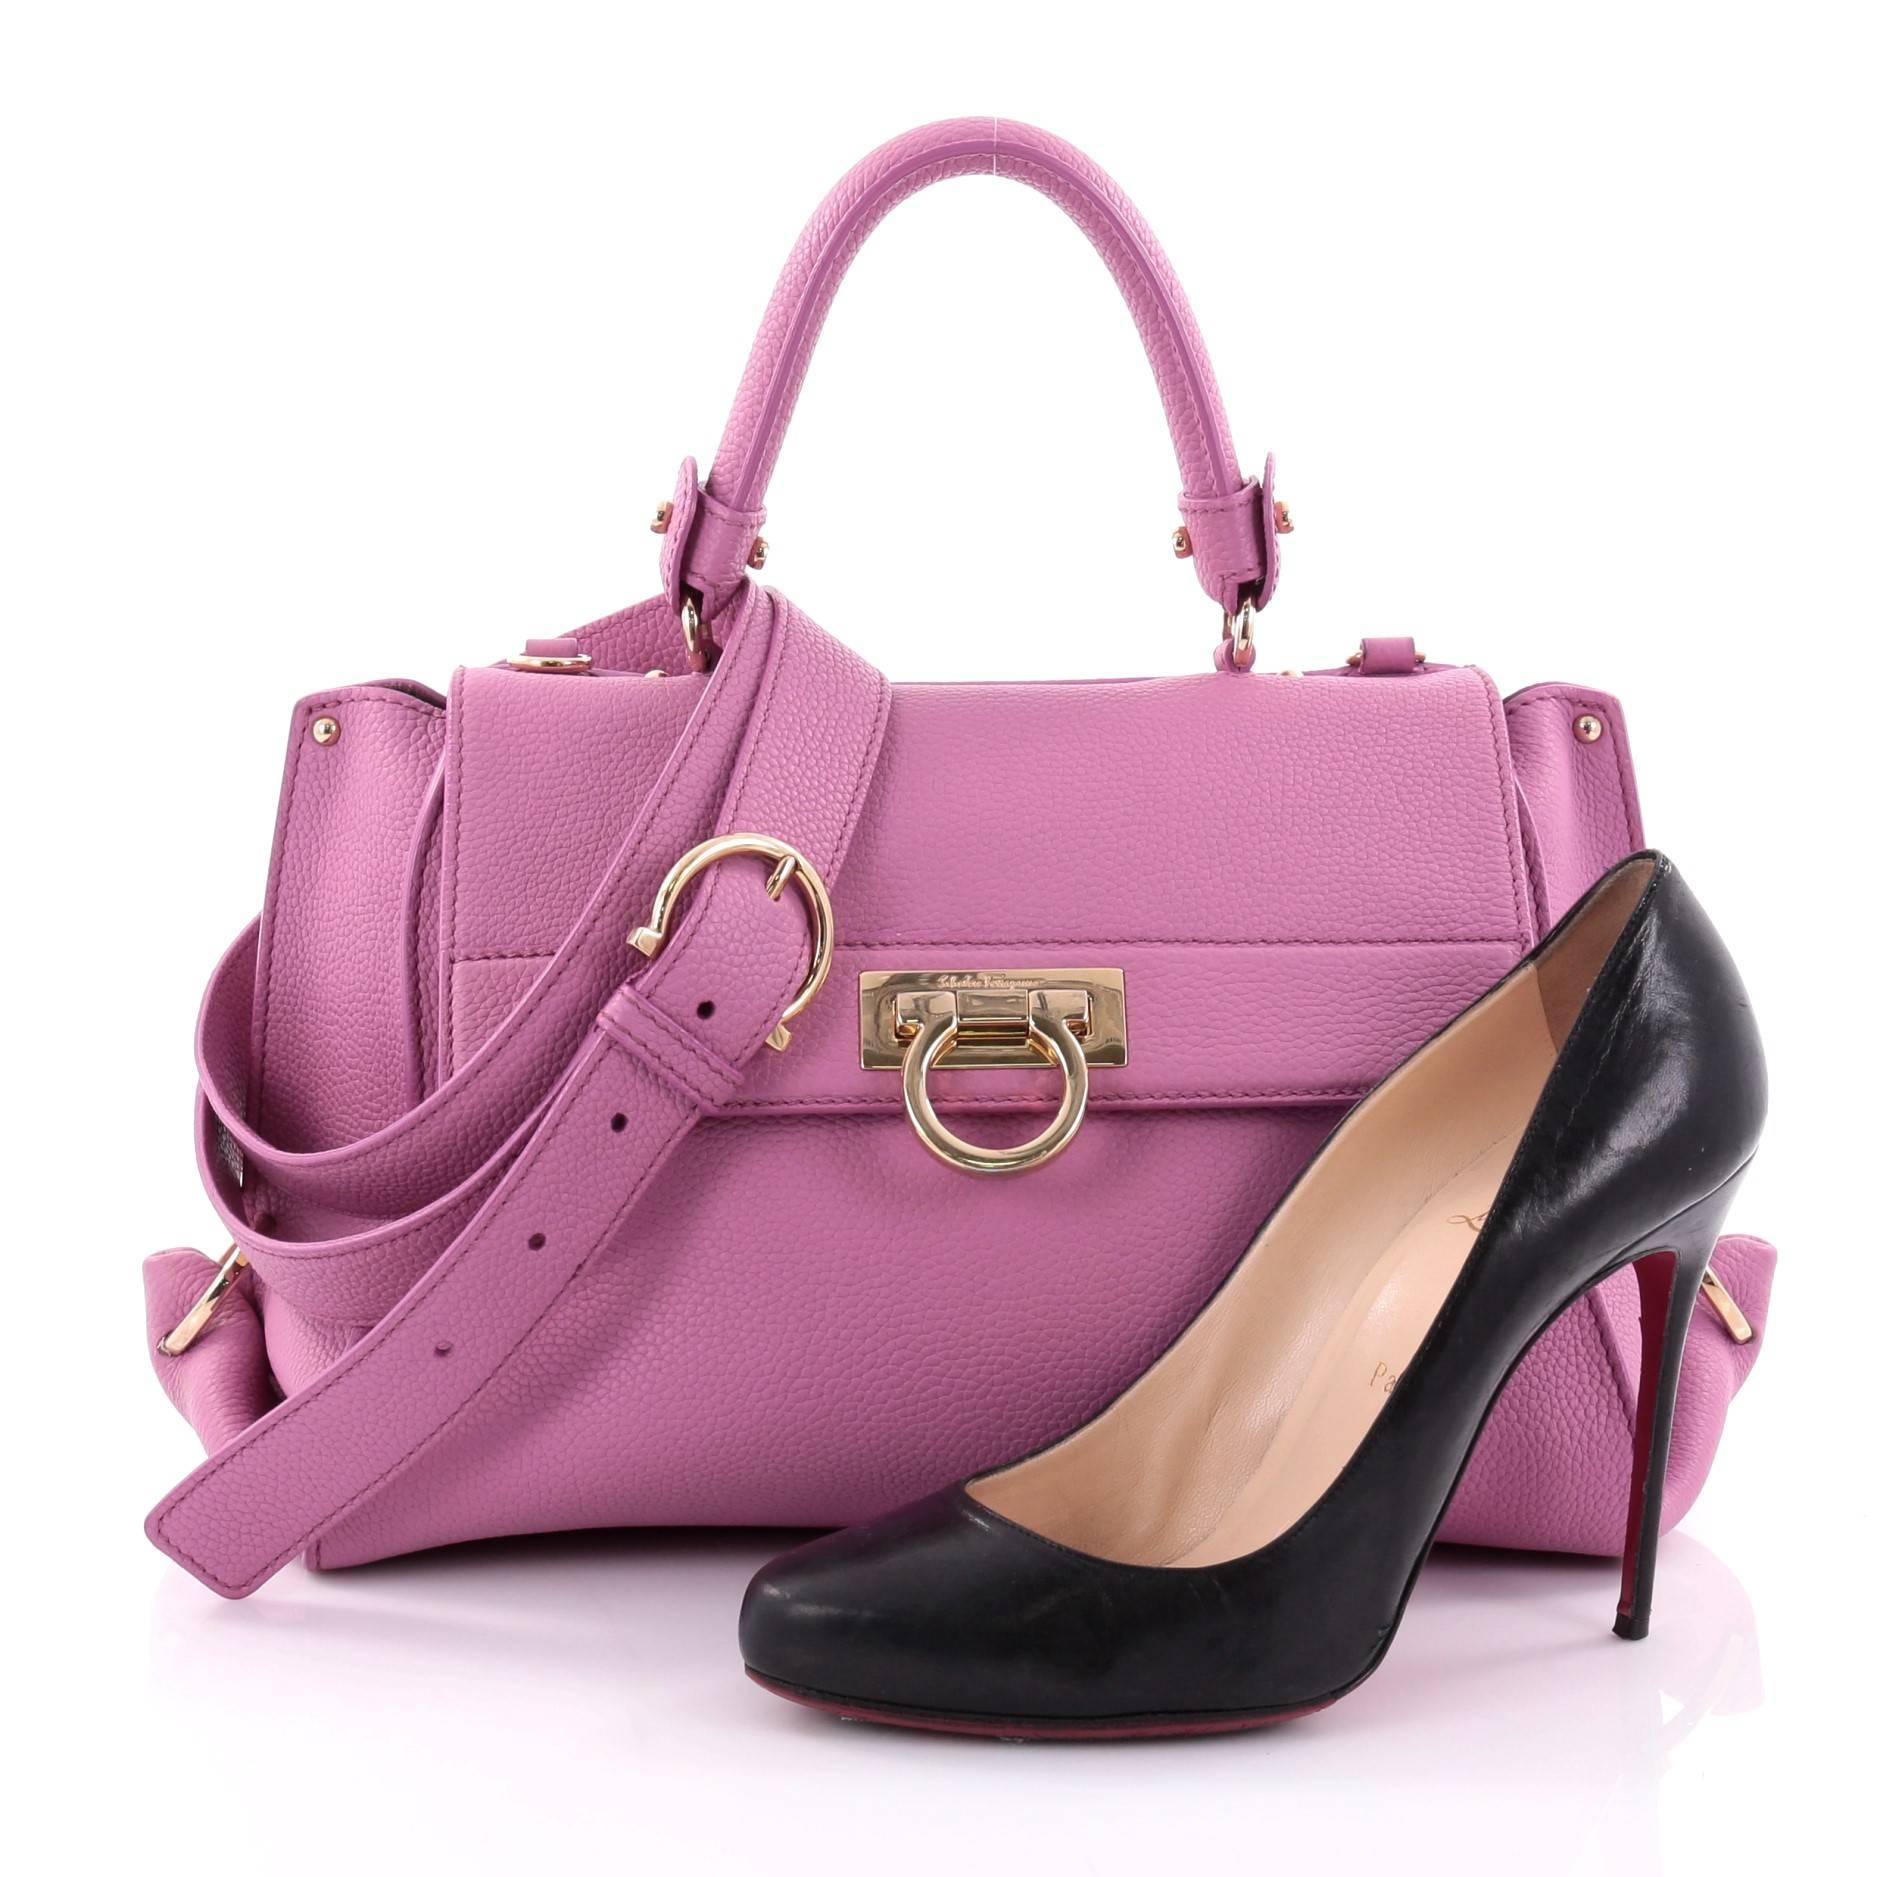 This authentic Salvatore Ferragamo Sofia Satchel Pebbled Leather Medium is a stylish and functional bag perfect for the modern woman. Crafted in pink pebbled leather, this bag features rolled leather handle, protective base studs, exterior back zip